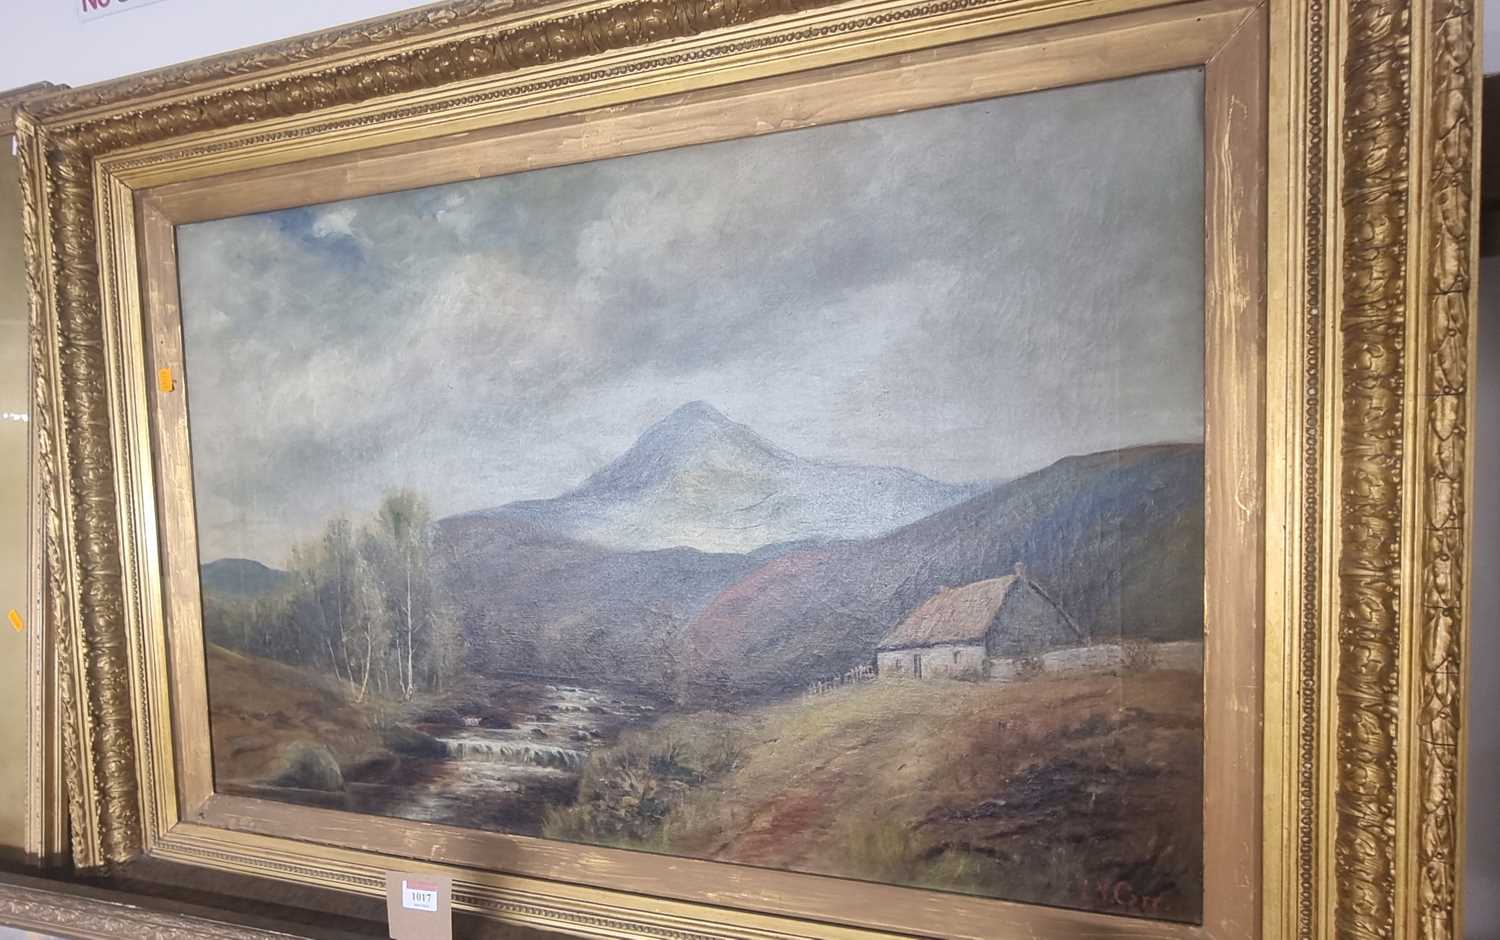 L Y Carr - North Country landscape with mountain and river, oil on canvas, signed lower right, 60